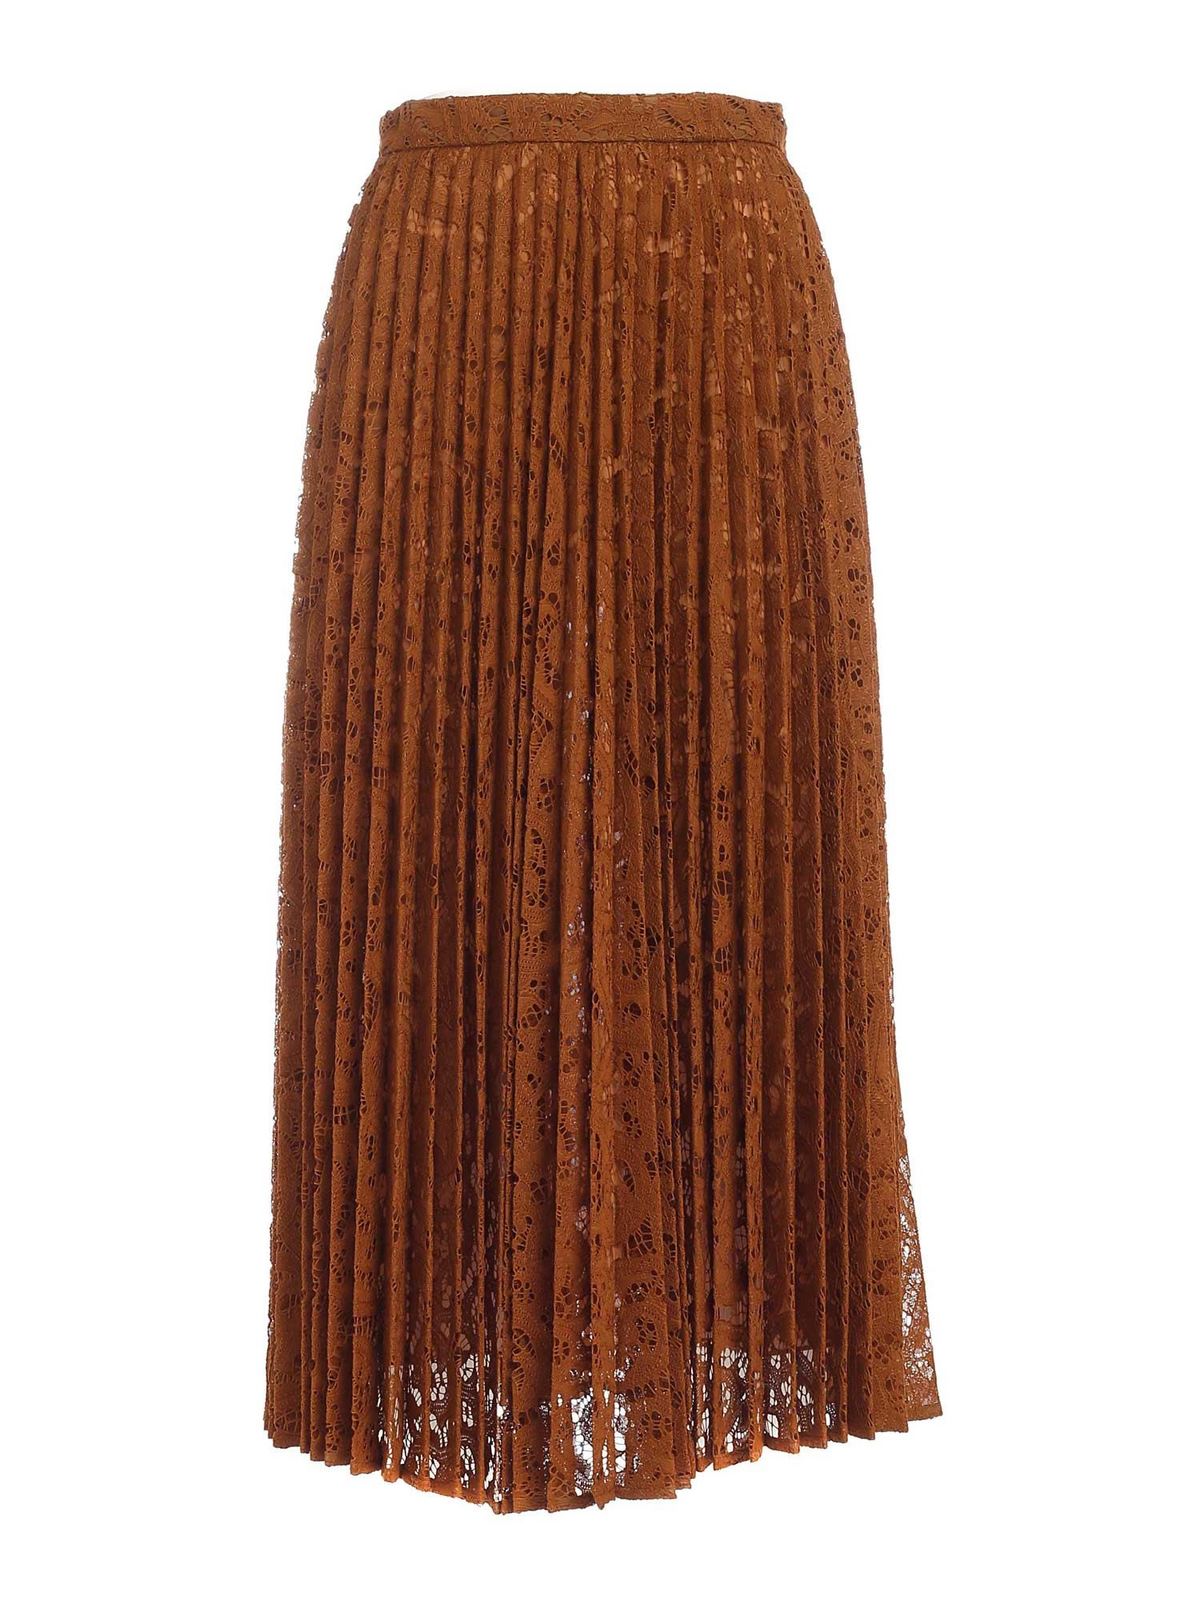 MAX MARA POLOMA SKIRT IN  LEATHER COLOR